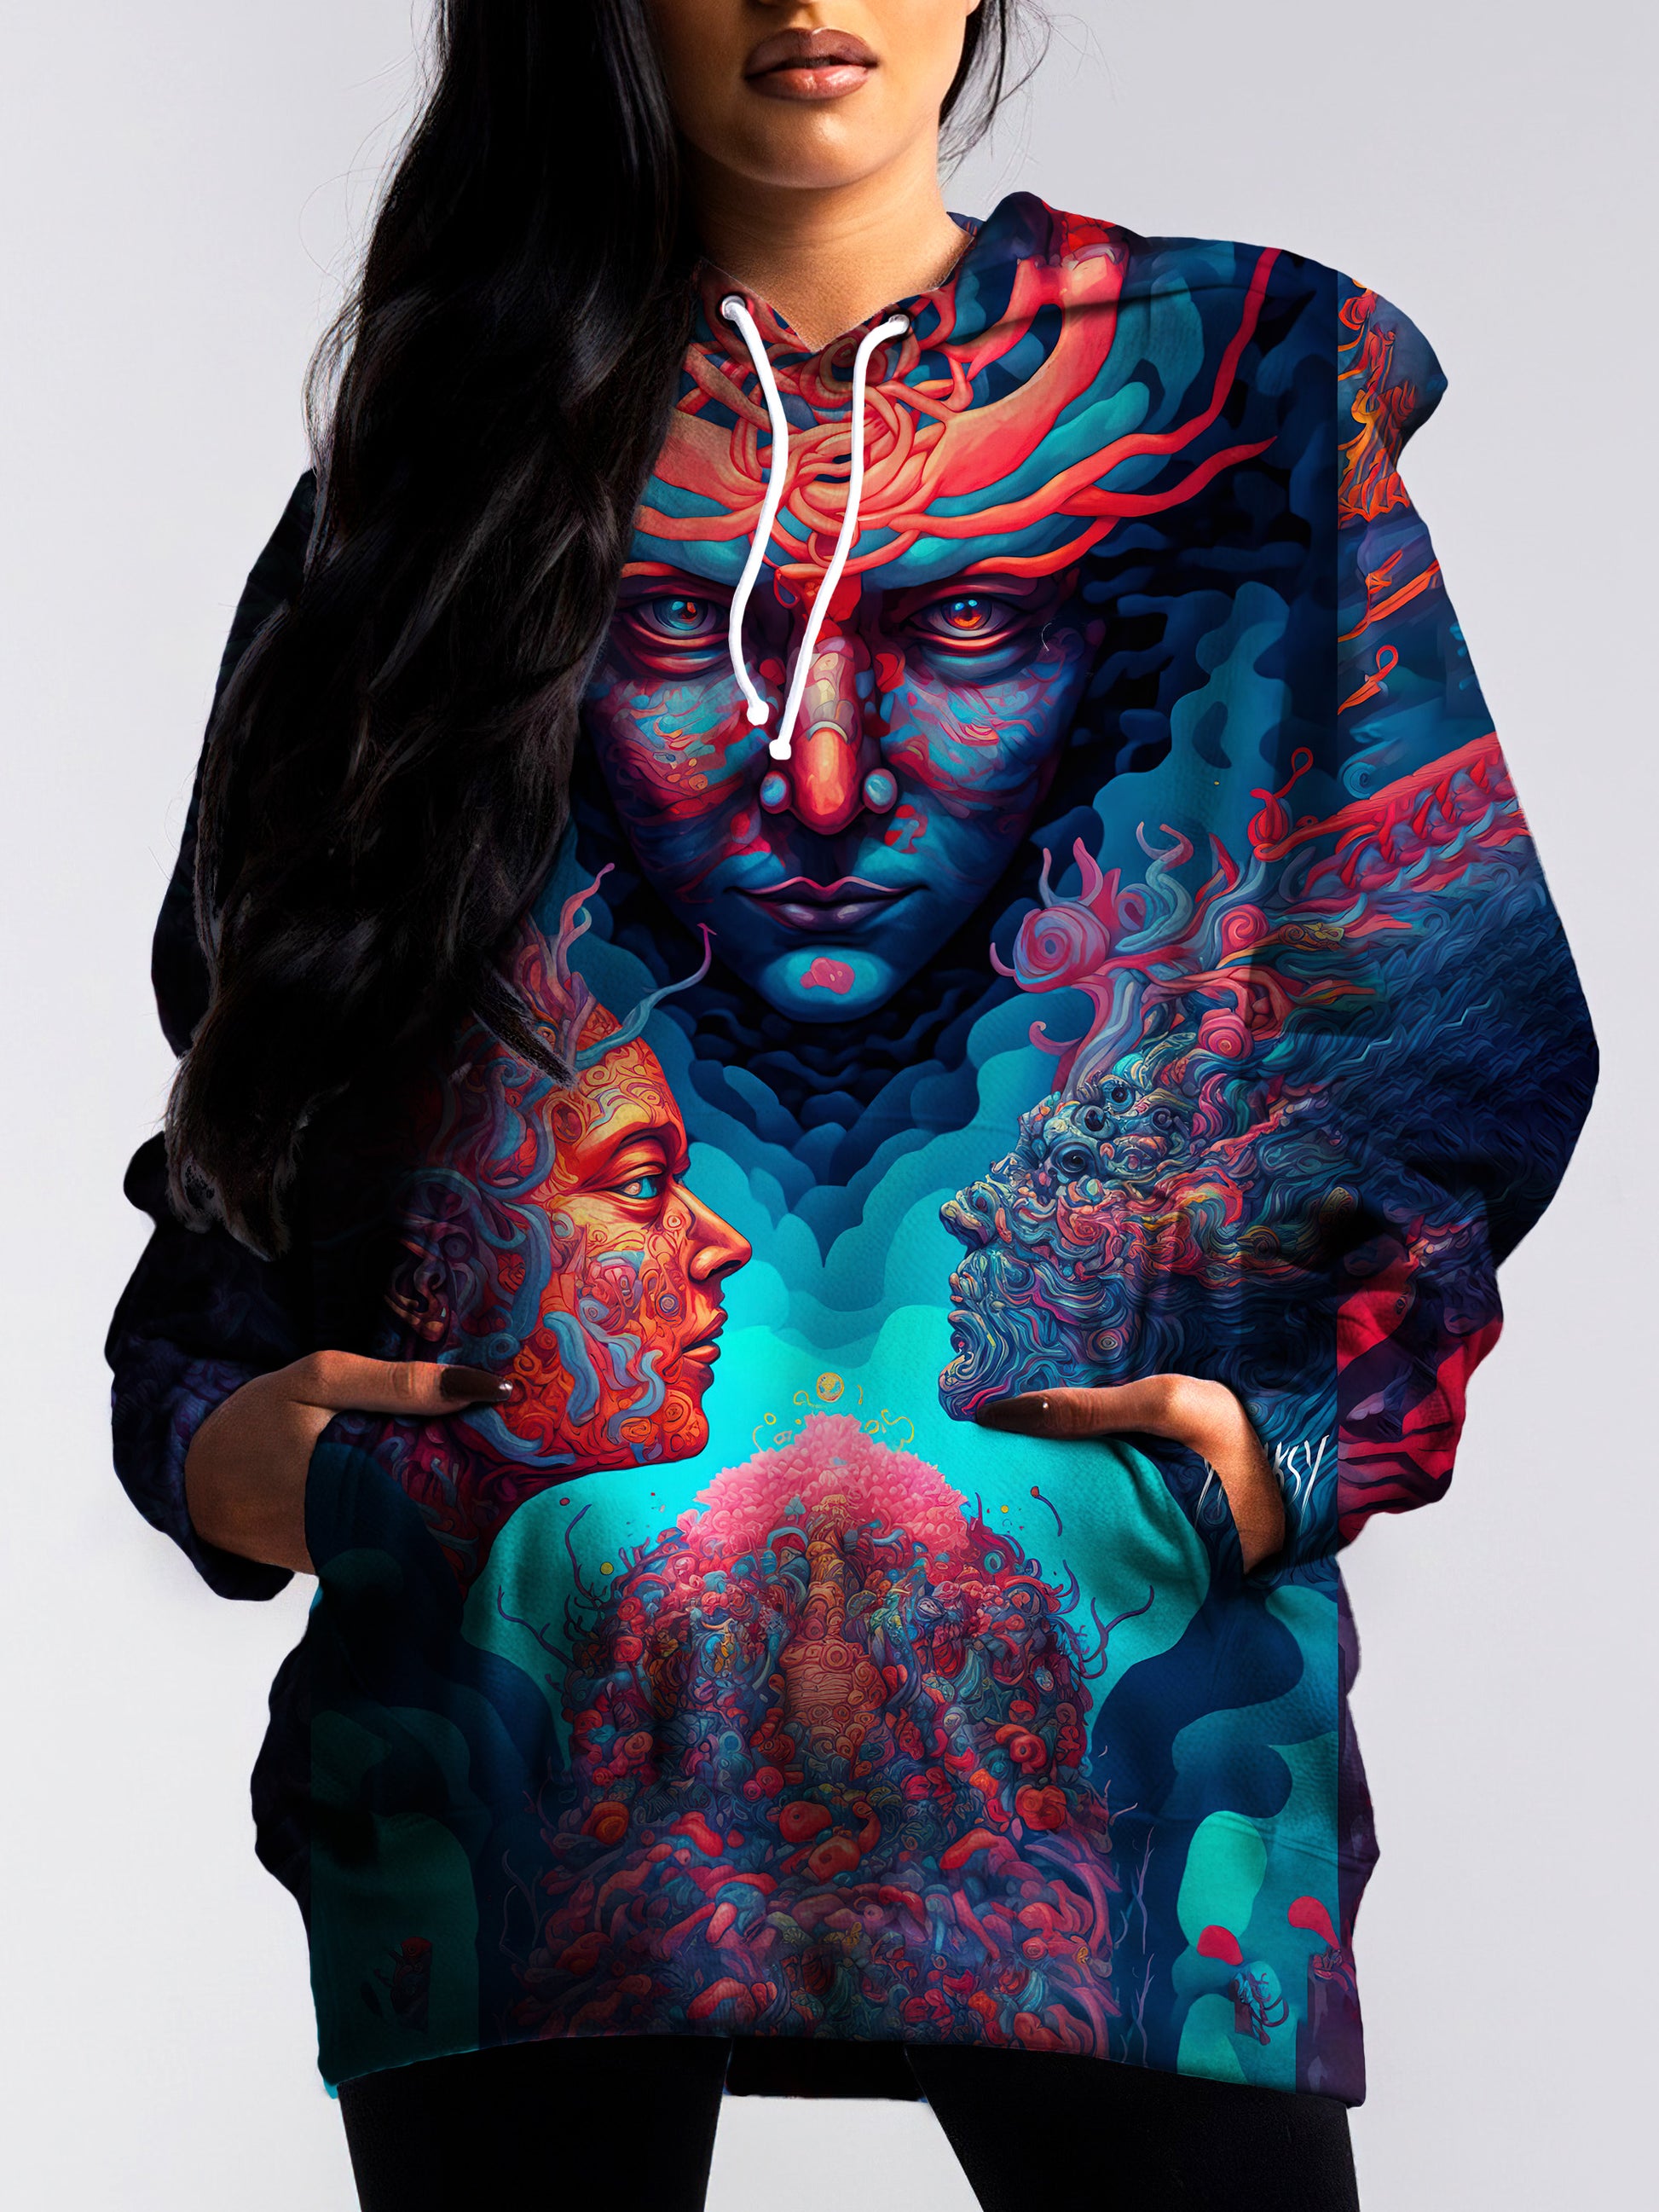 Express your creativity and unique style with this psychedelic sublimation pullover hoodie